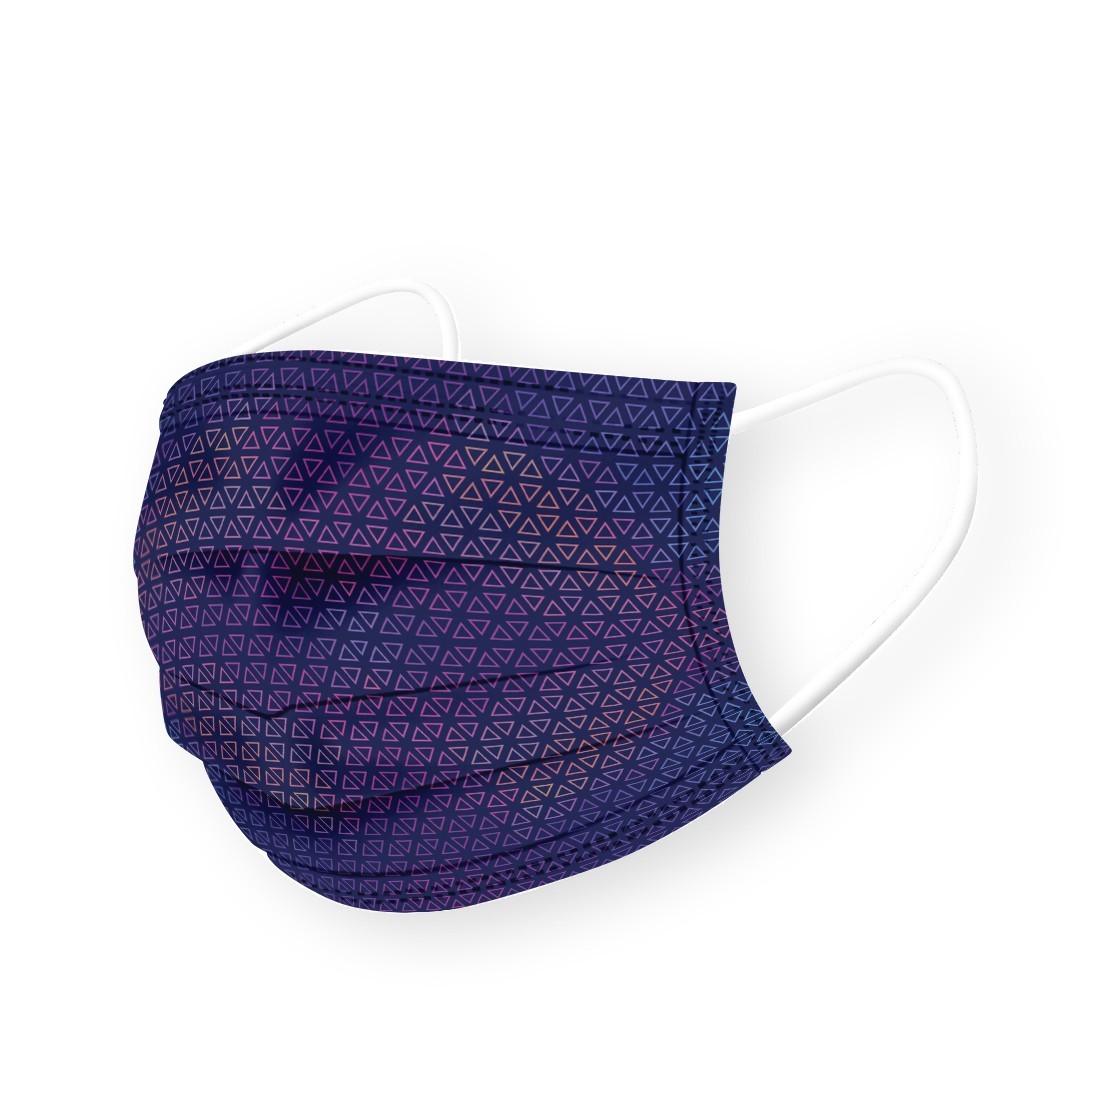  Mask Disposable For Adult With Geometric Pattern